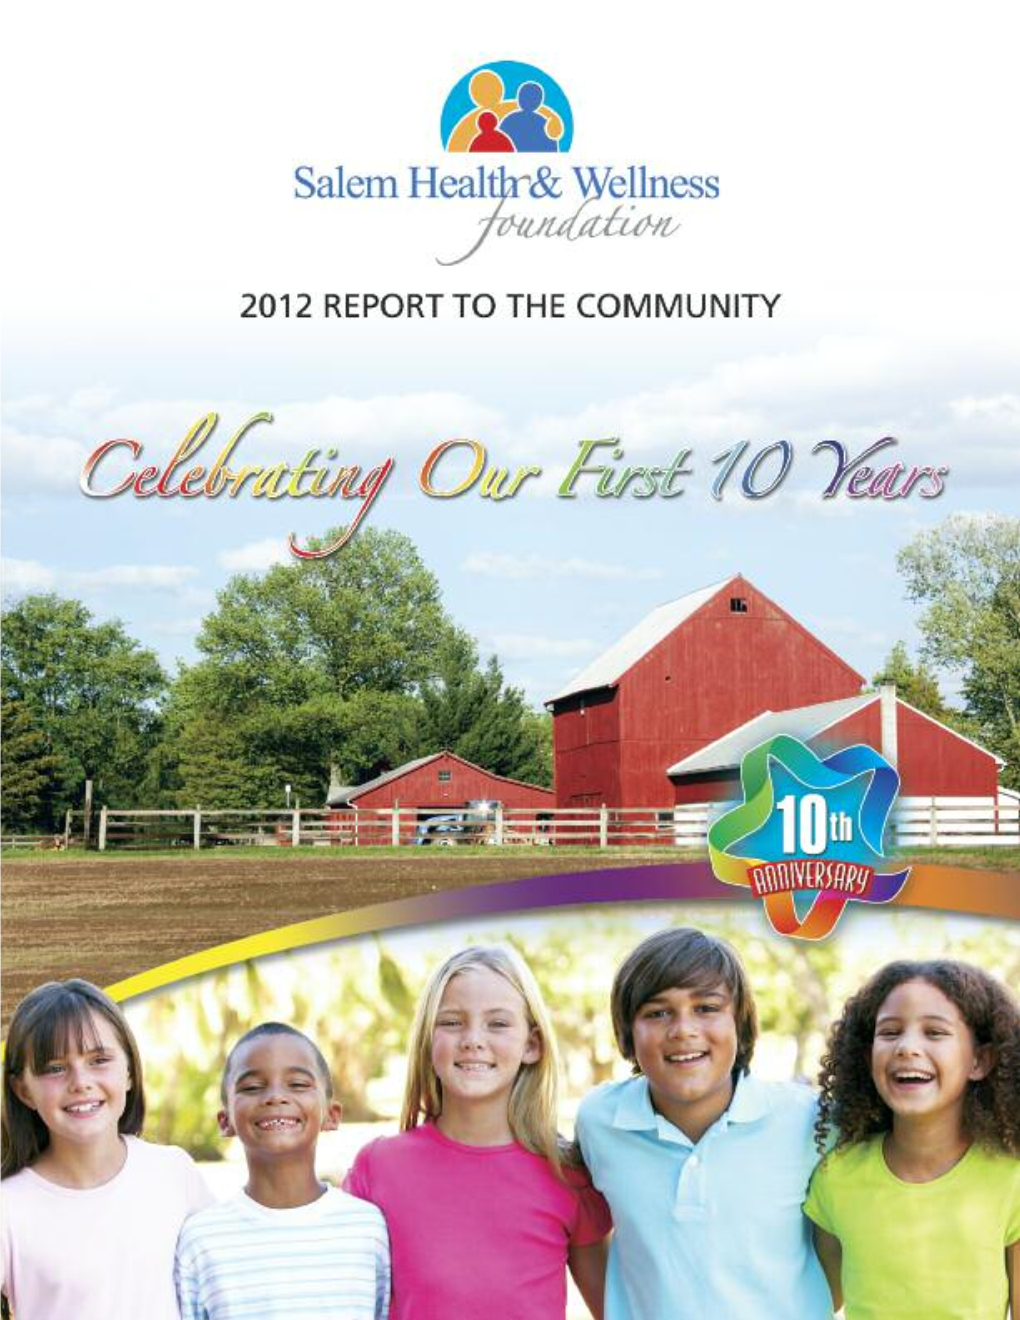 Download the 2012 Annual Report